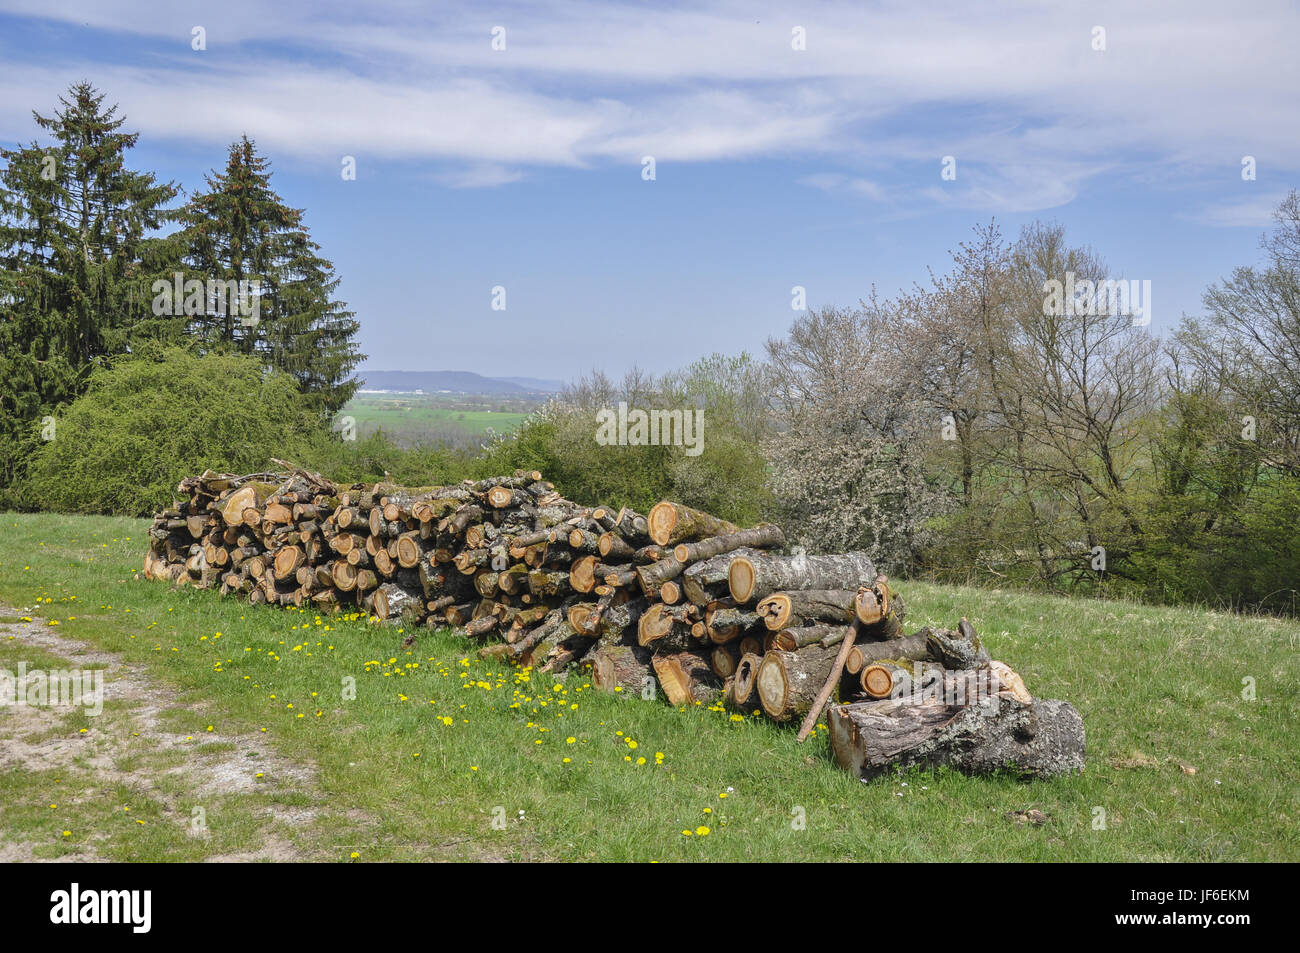 Firewood in meadow orchard, Germany Stock Photo